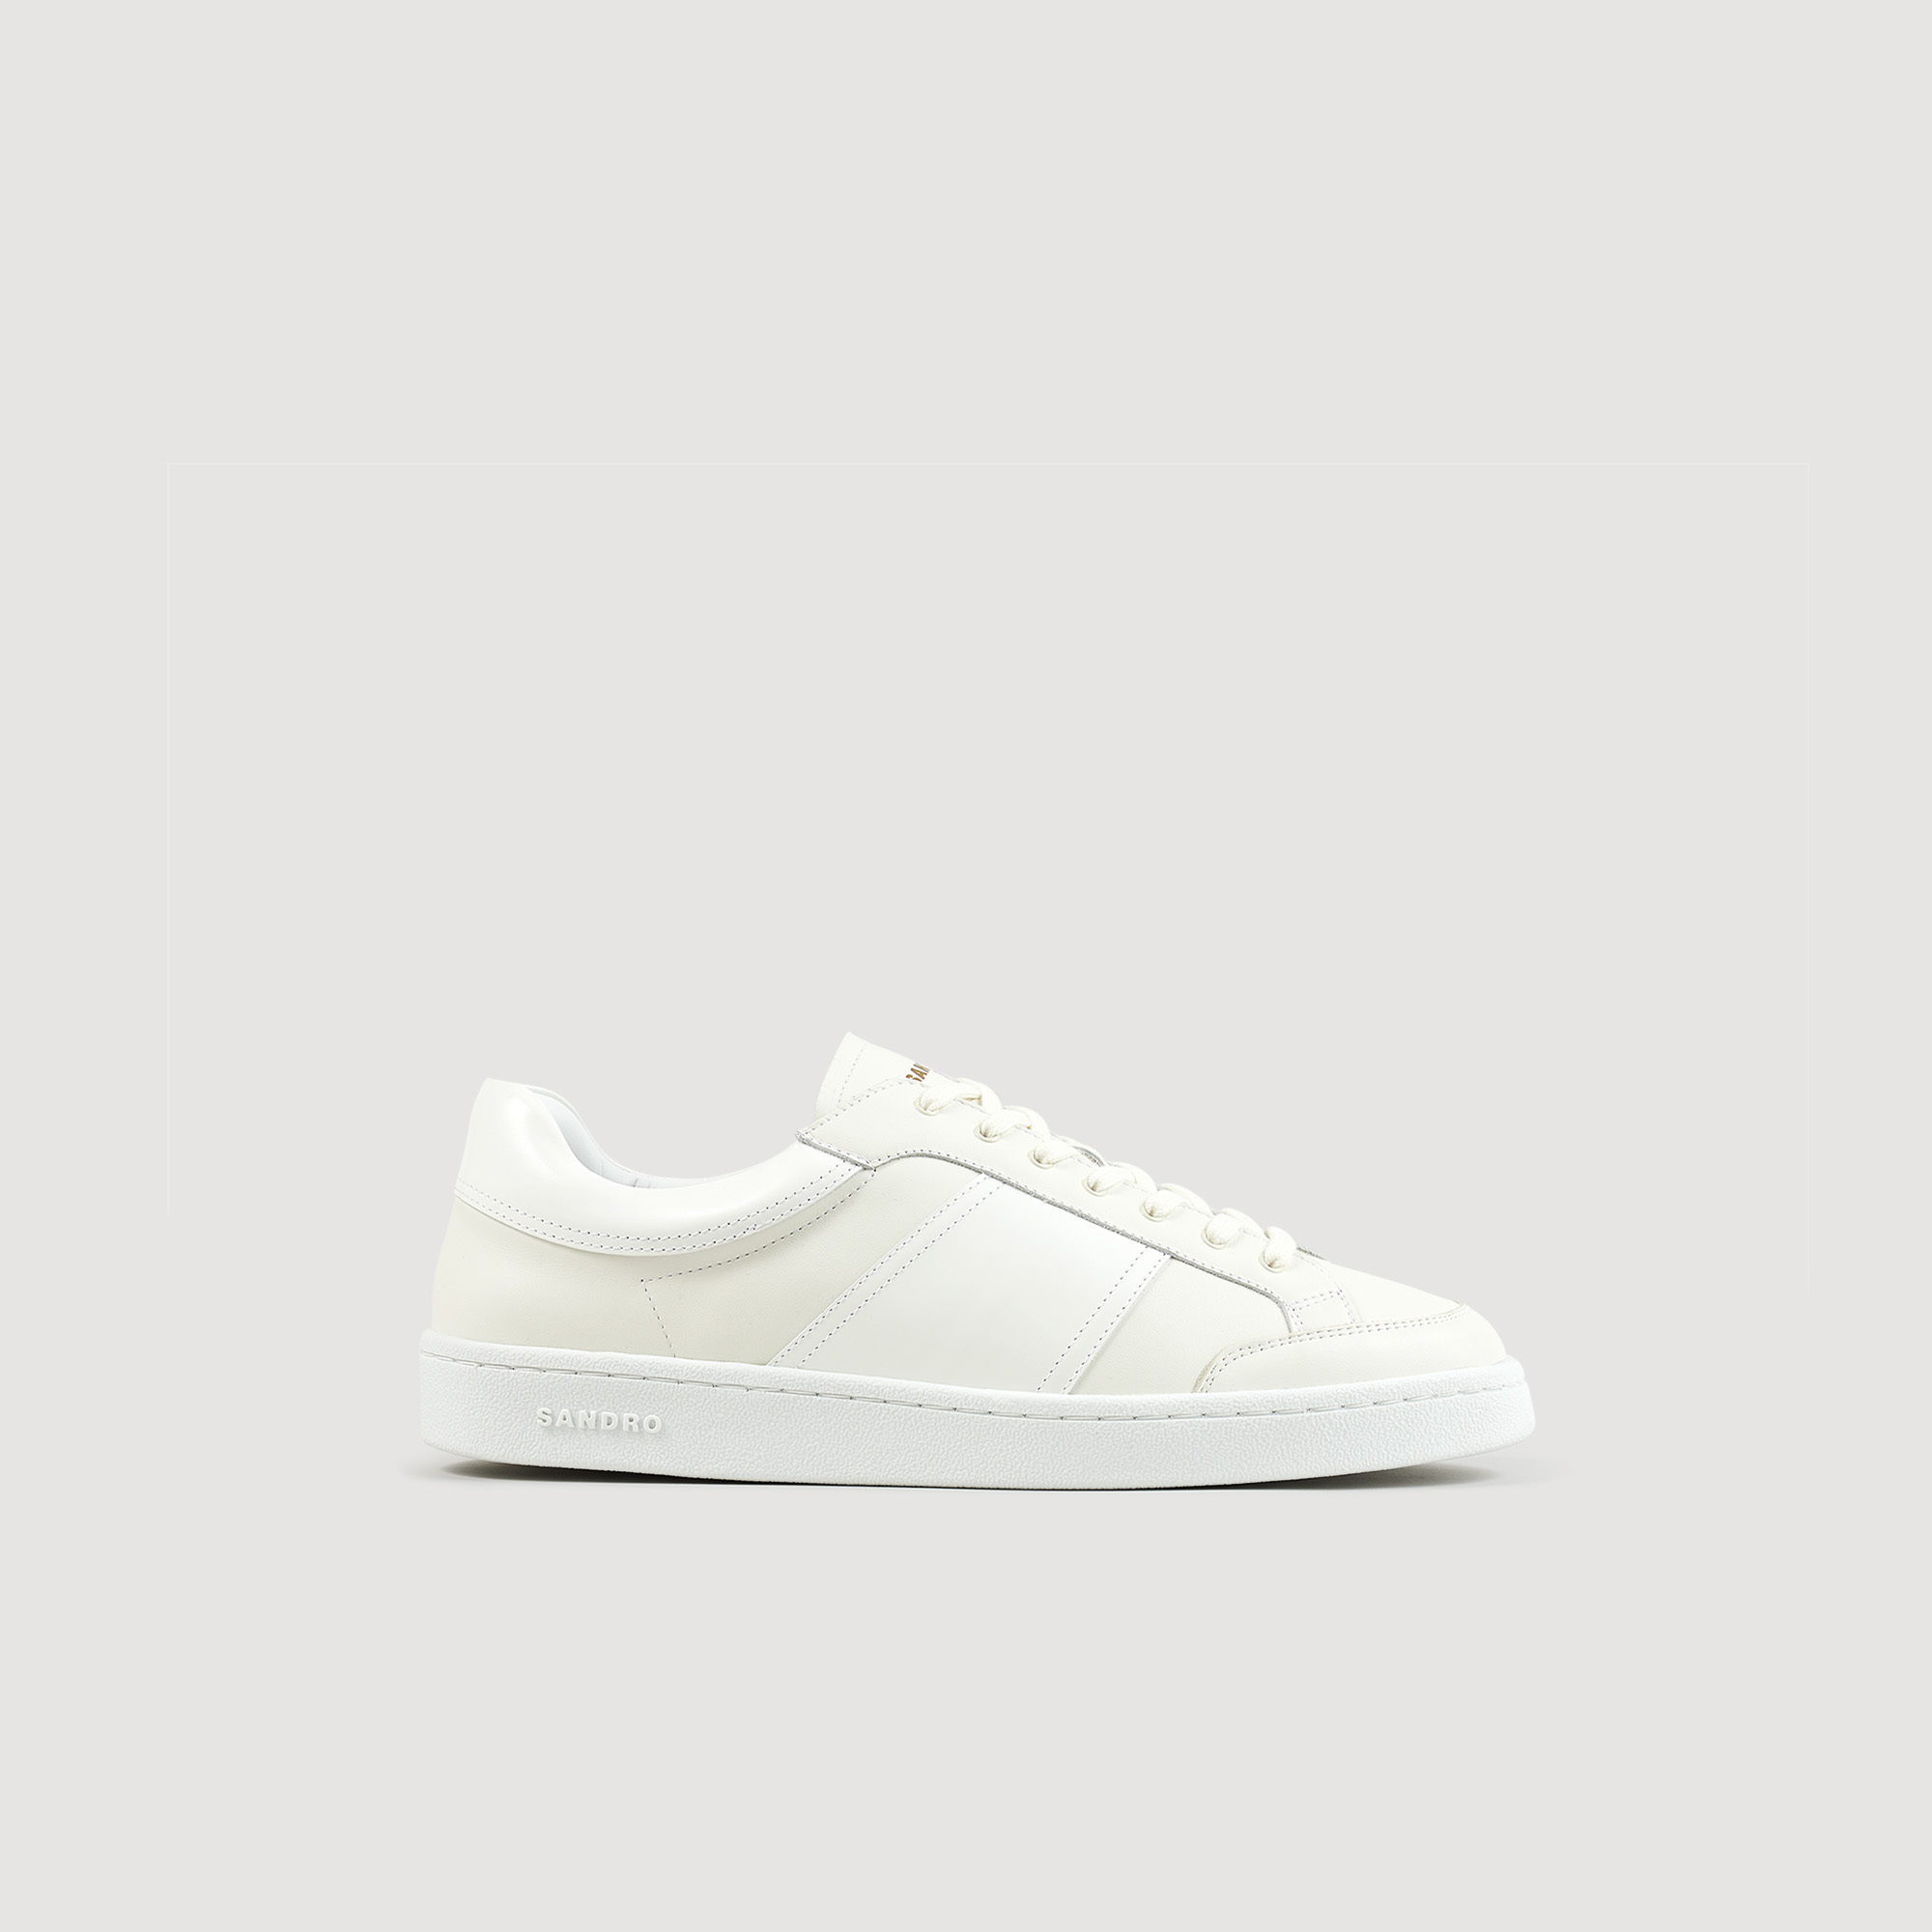 Sandro rubber Leather: cow Body lining: Leather low-top sneakers featuring a bonded tongue embellished with the gold Sandro logo, a gum sole, laces, and patent leather inserts on the sides